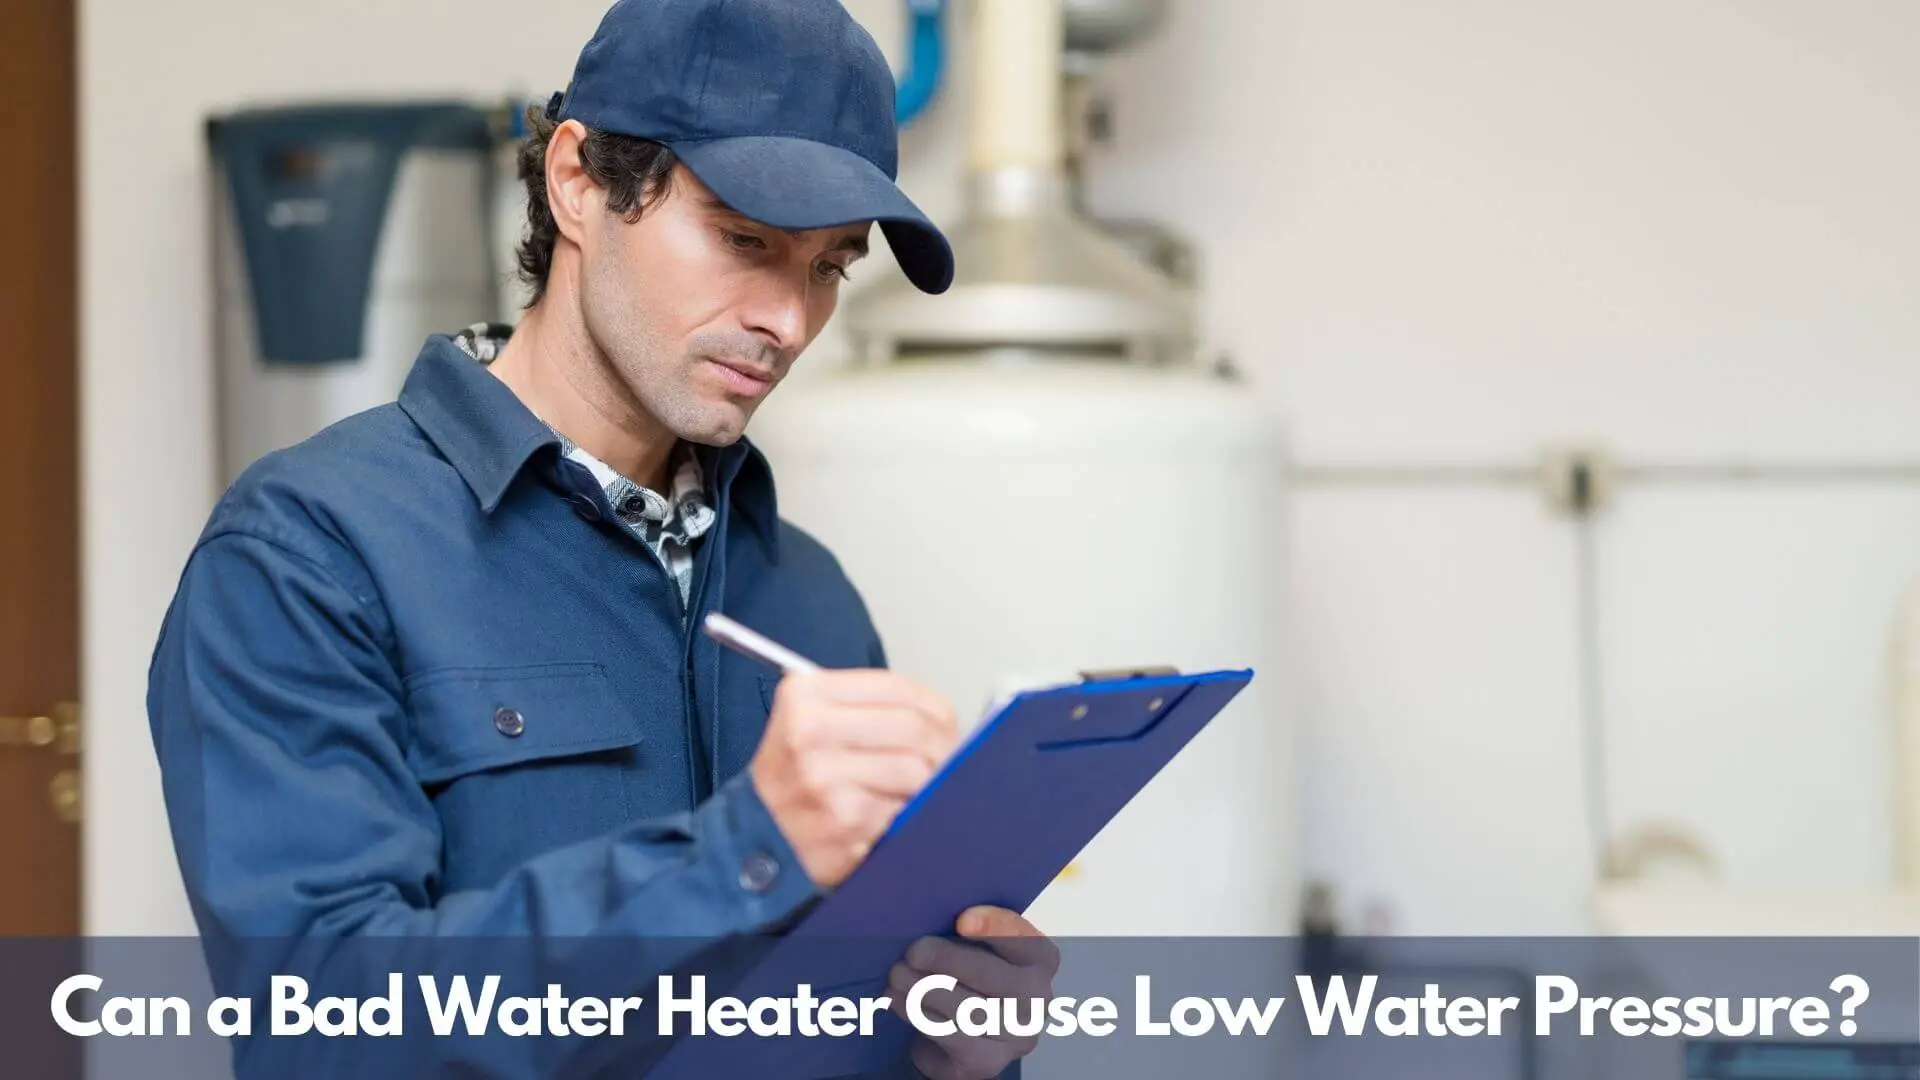 Can a Bad Water Heater Cause Low Water Pressure